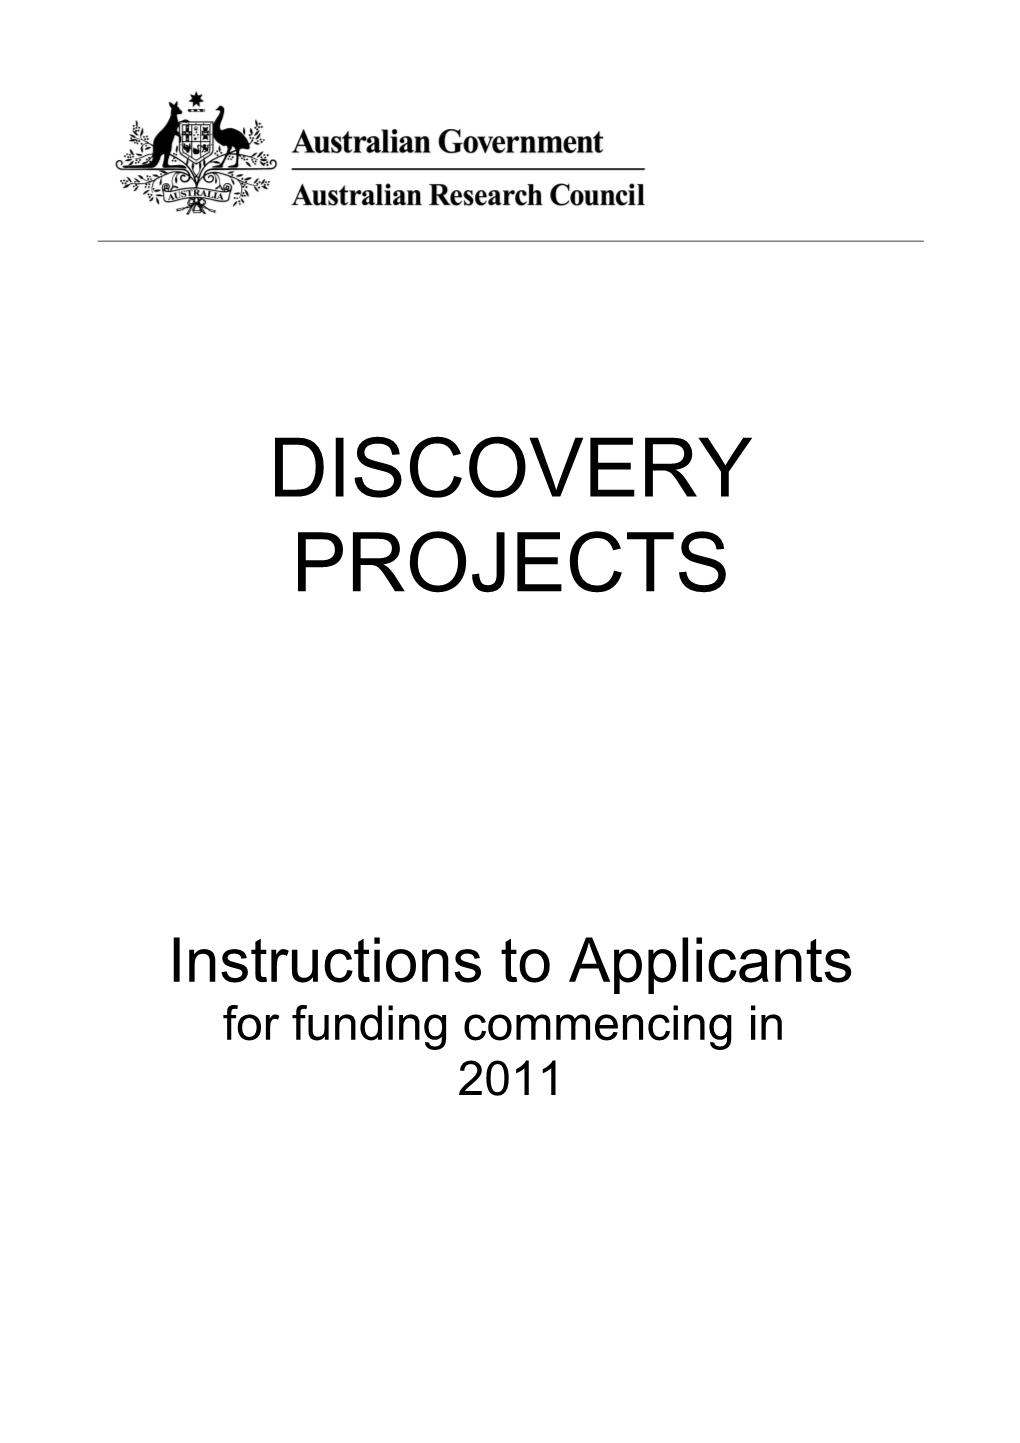 Discovery Projects Instructions to Applicants - for Funding Commencing in 2011